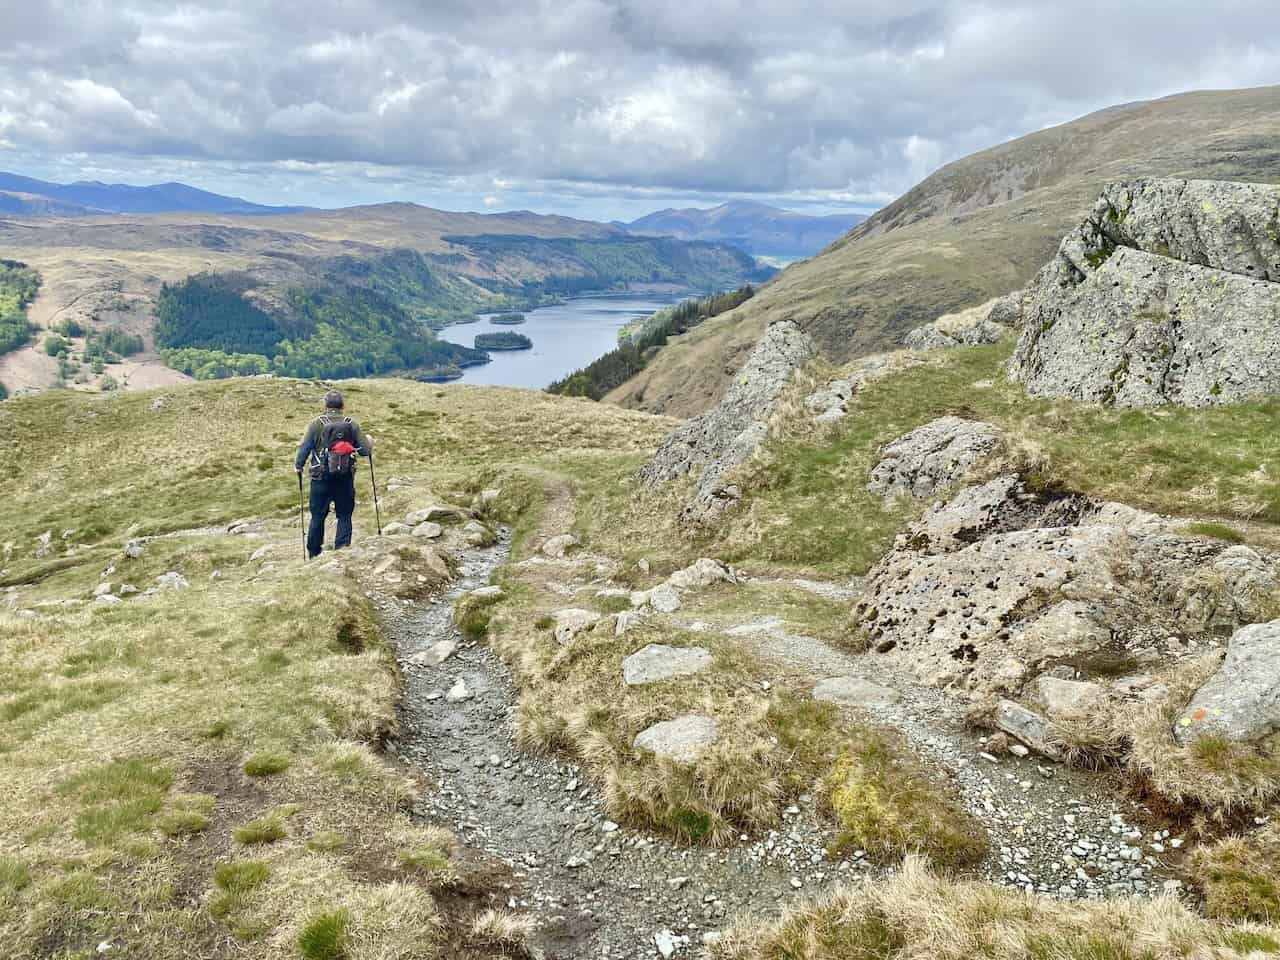 The descent of Birk Side near Comb Crags and magnificent views of Thirlmere. This is roughly the halfway point of this Helvellyn circular walk.